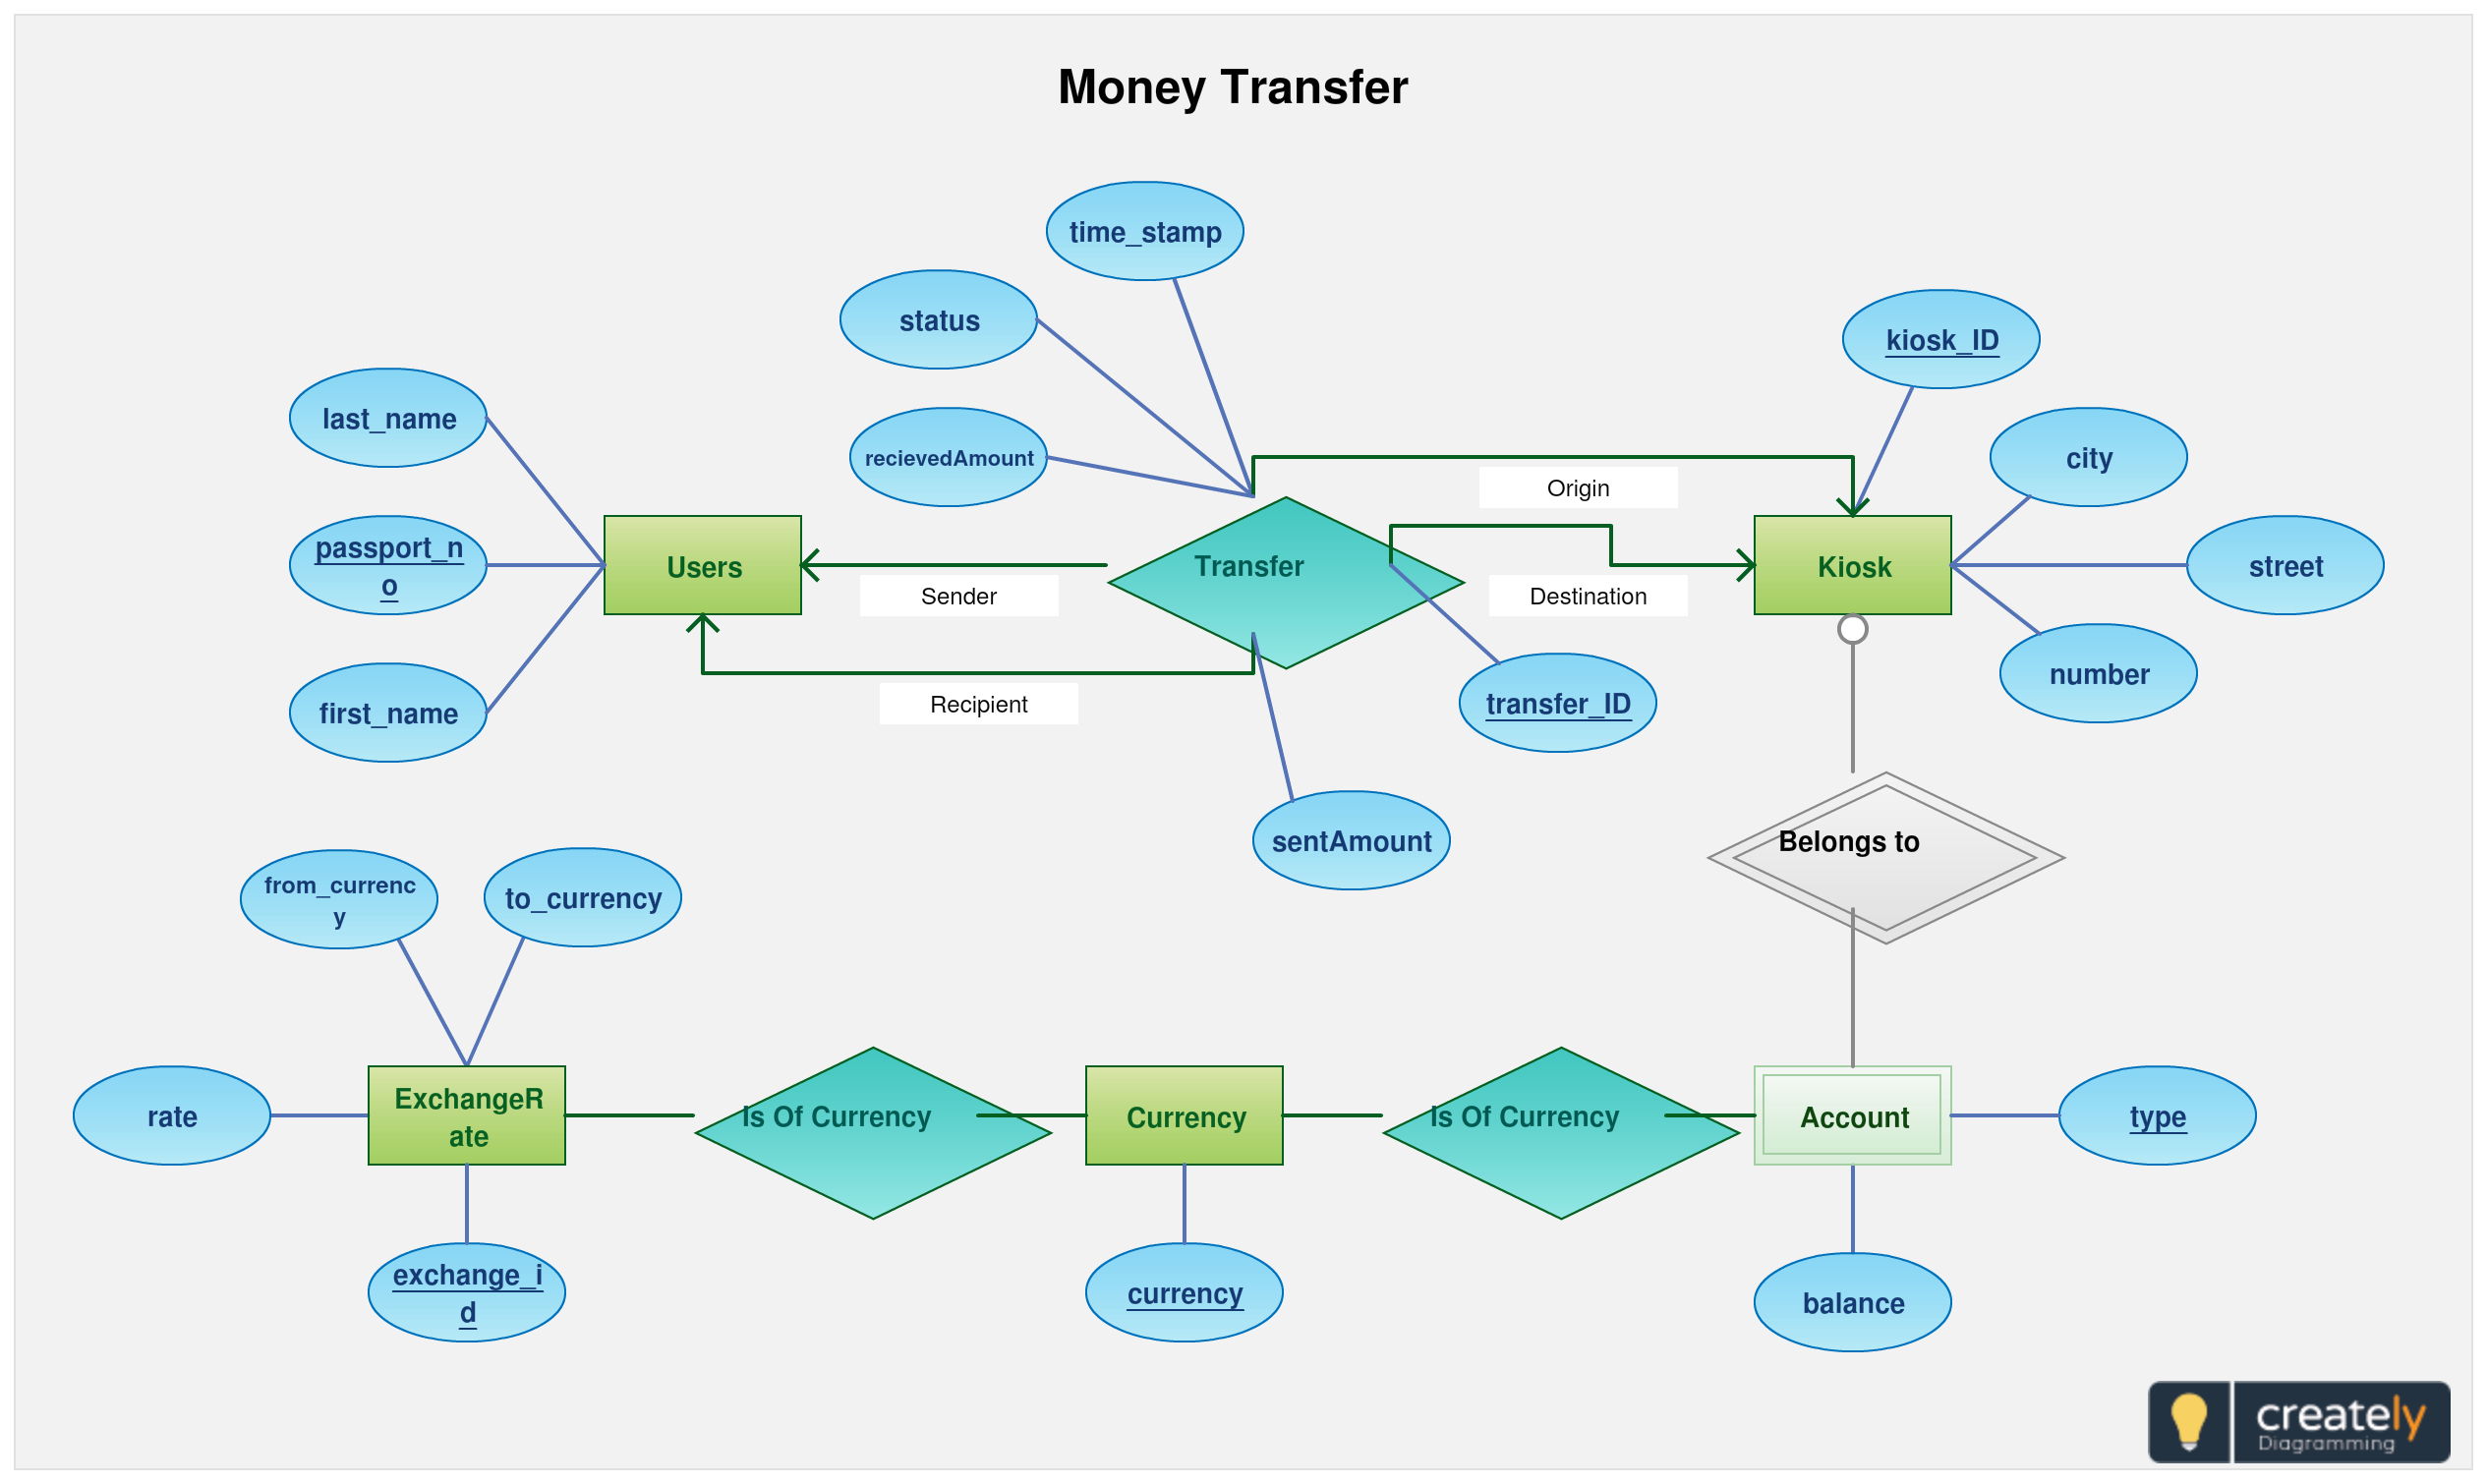 Entity Relationship Diagram Of Fund Transfer - Use This for Er Model Diagram